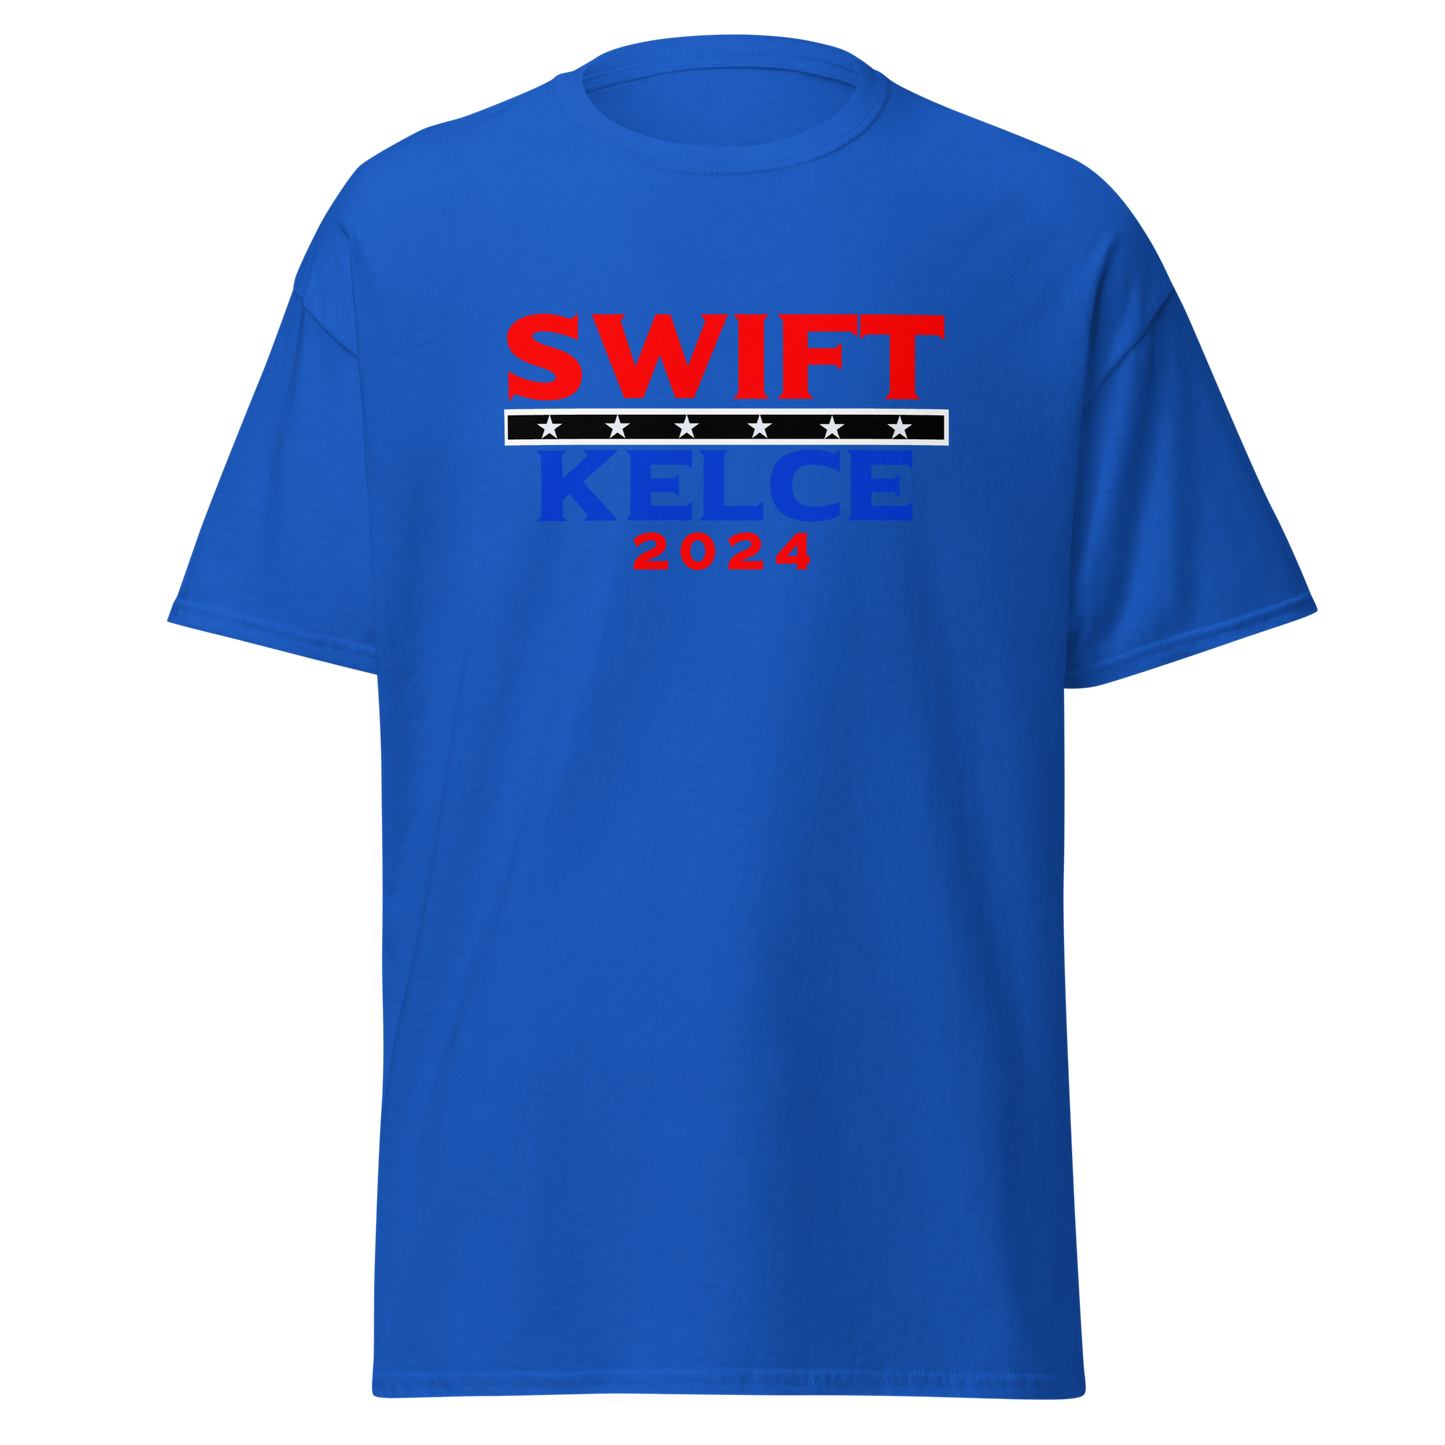 Swift and Kelce 2024 T-Shirt